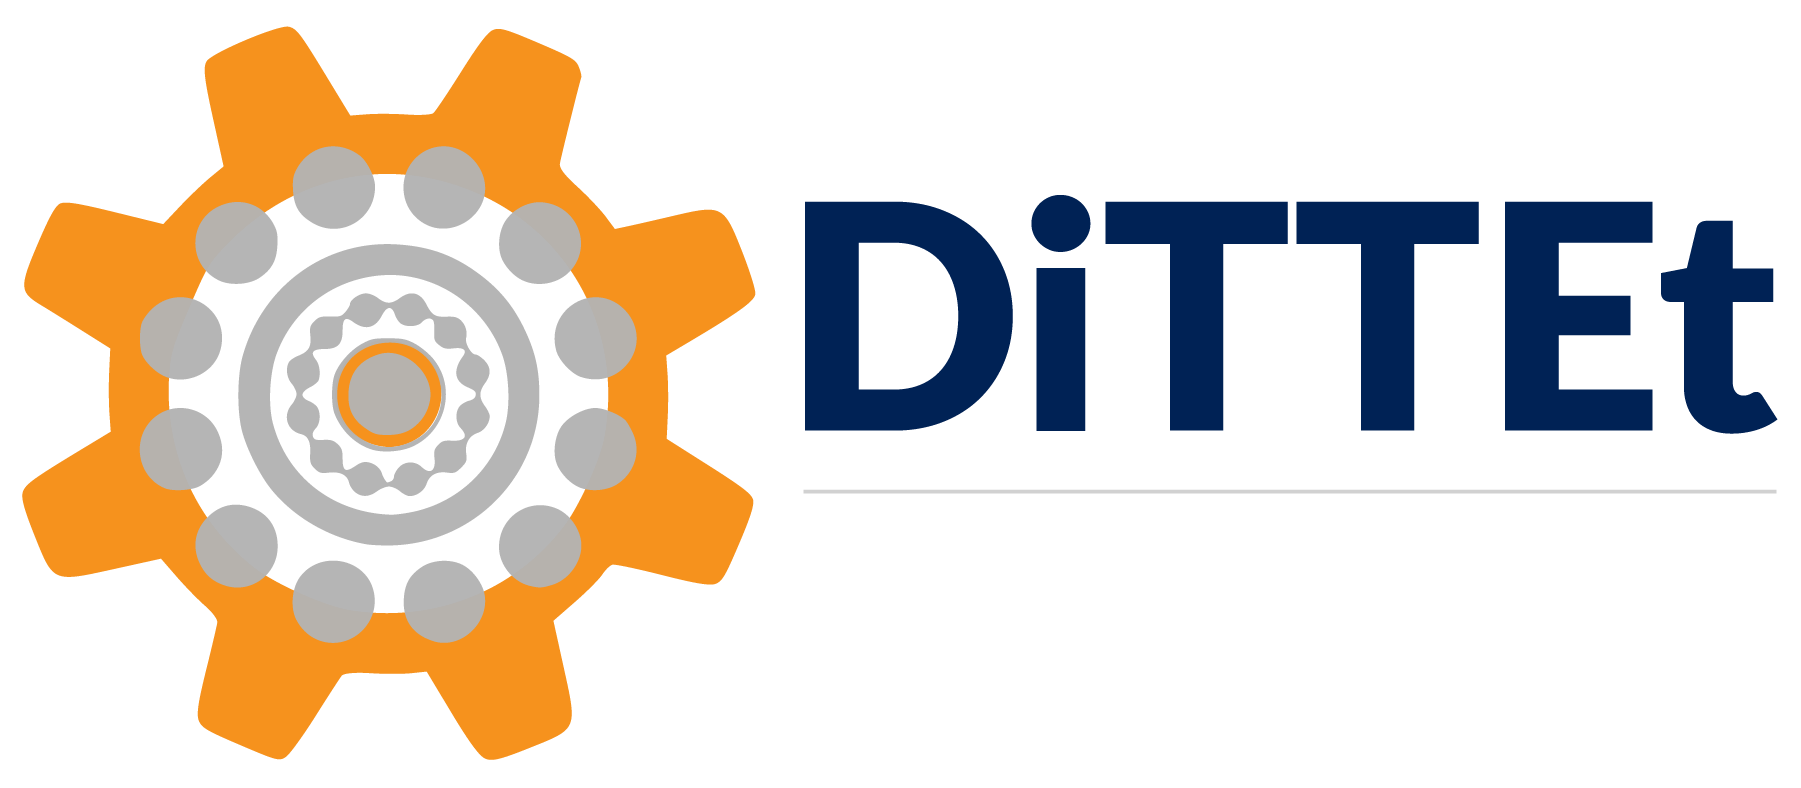 4th International Conference on Disruptive Technologies, Tech Ethics and Artificial Intelligent (DiTTEt)